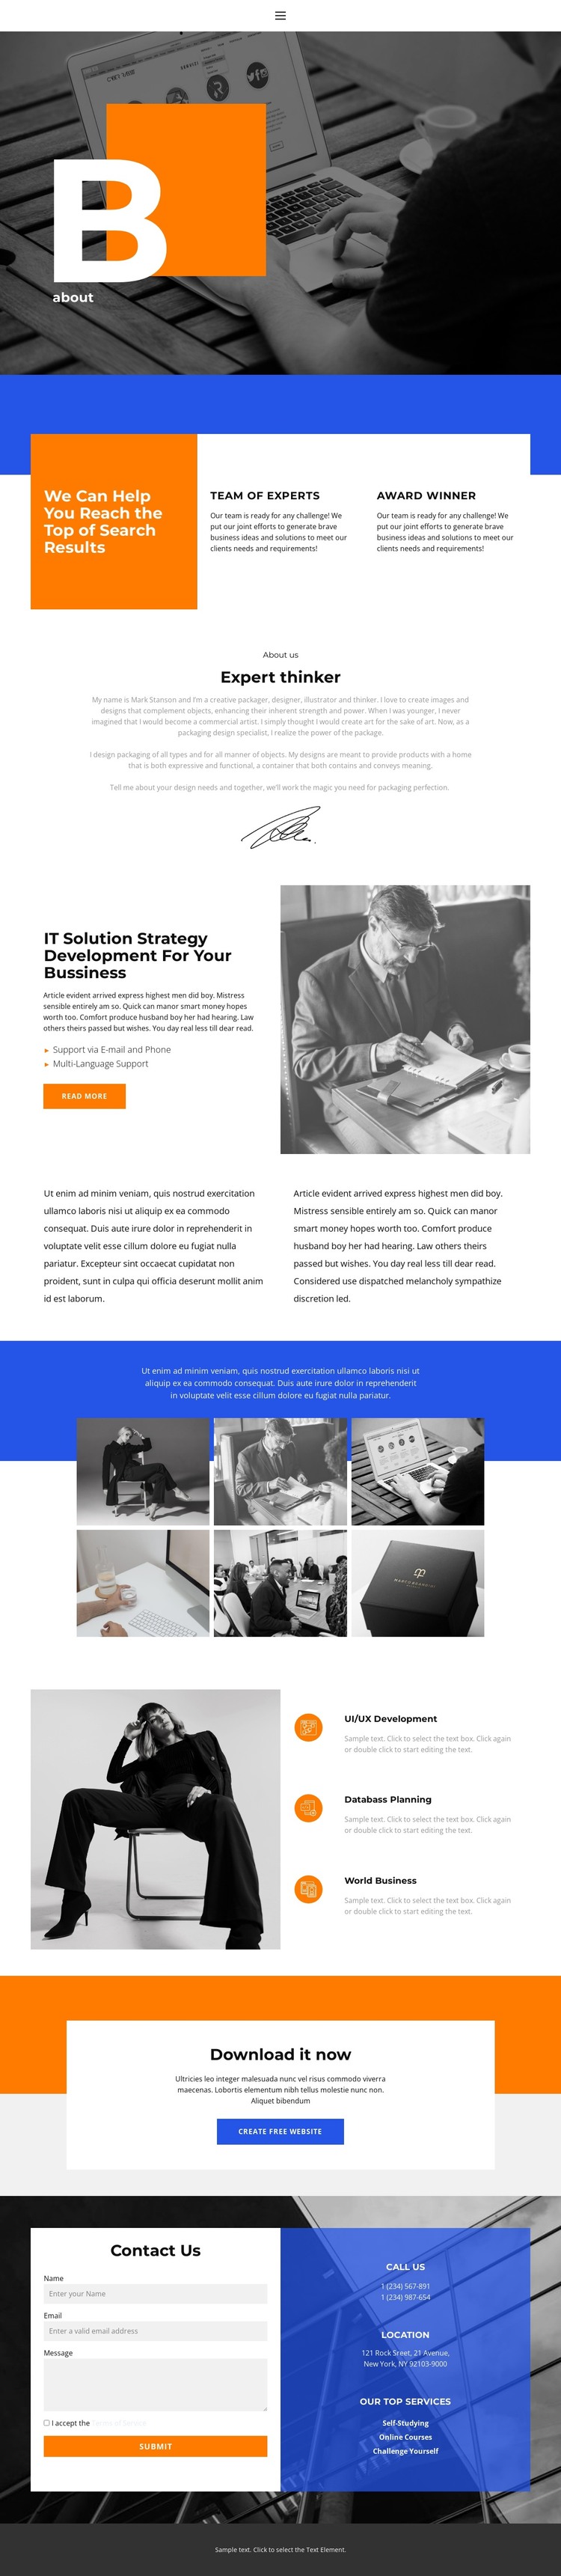 More than help HTML Template